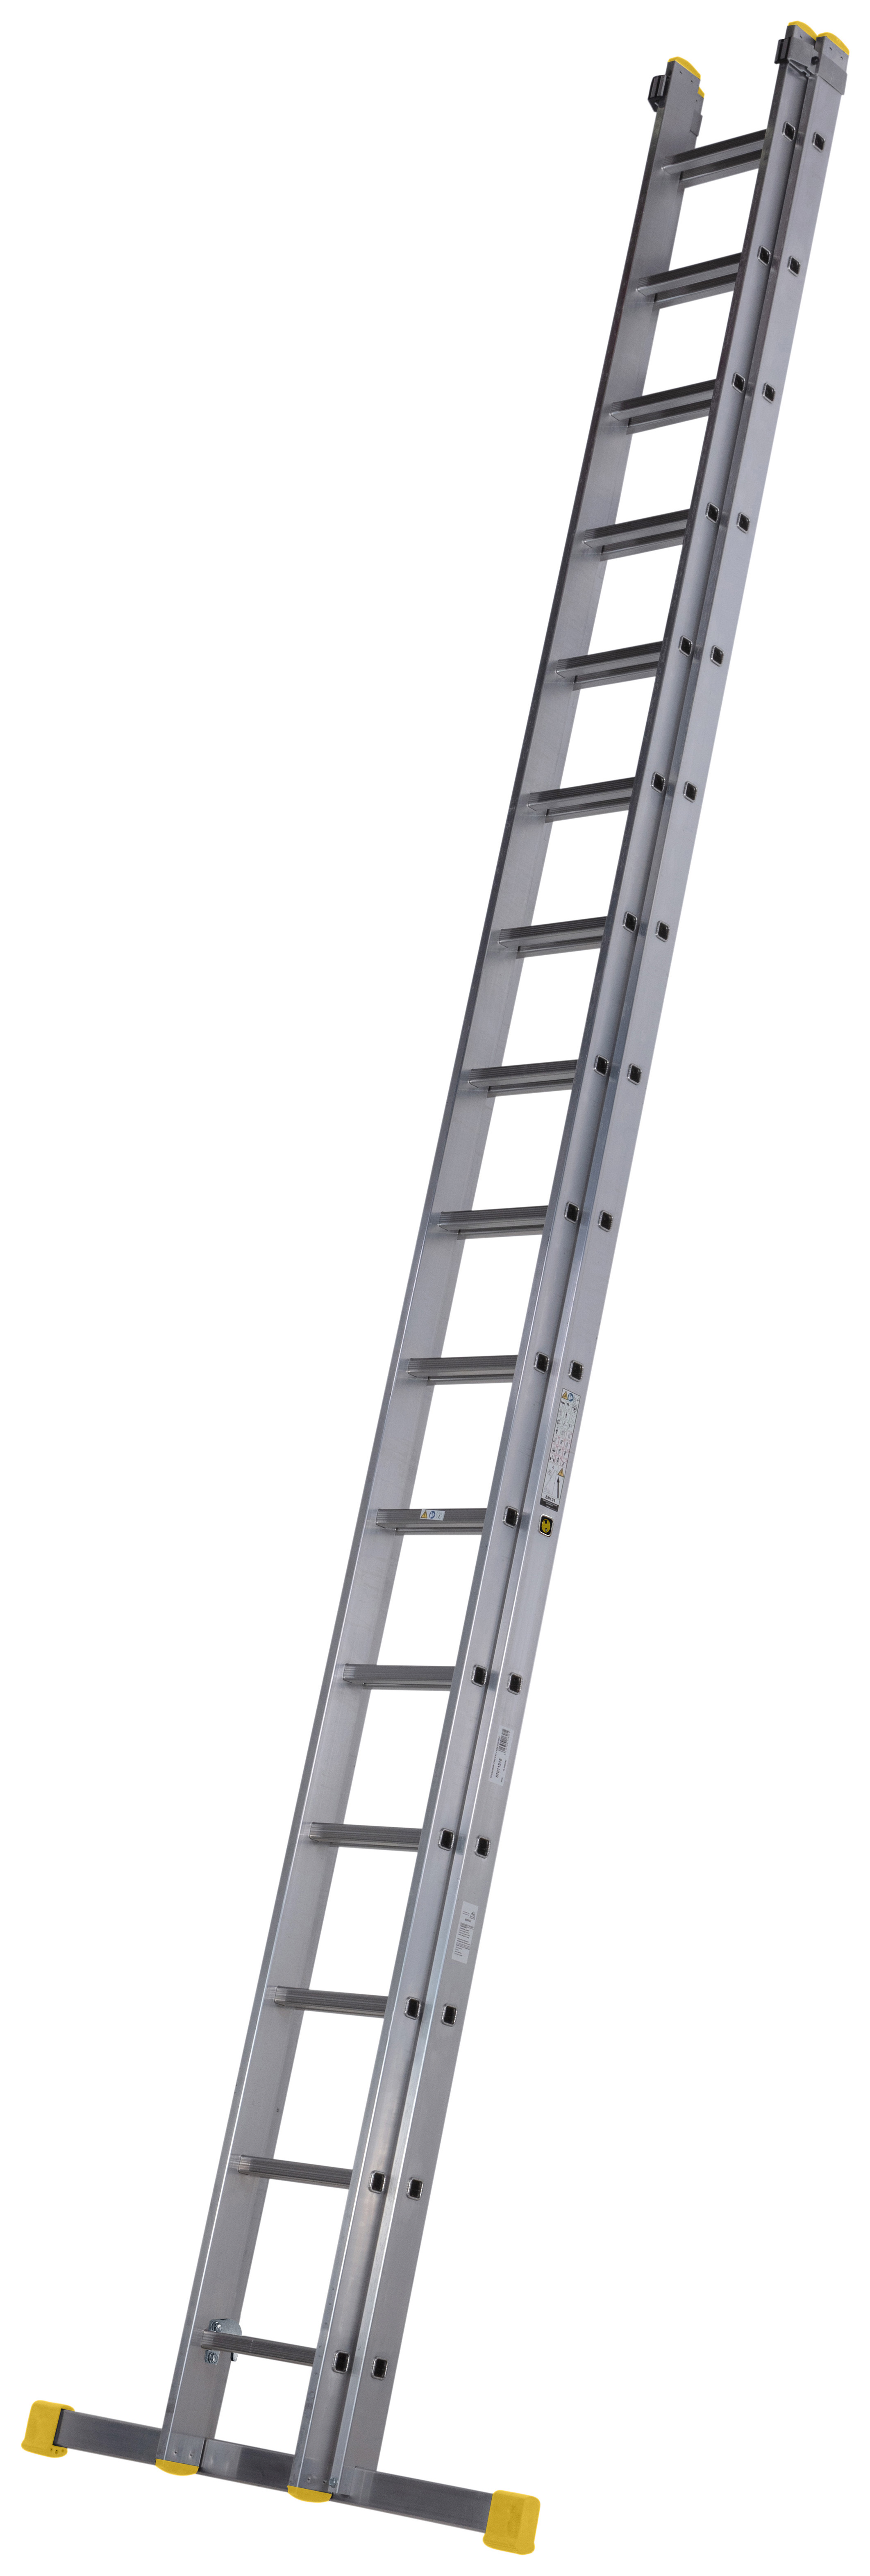 Werner Square Rung Double Extension Ladder - Max Height 8.33m